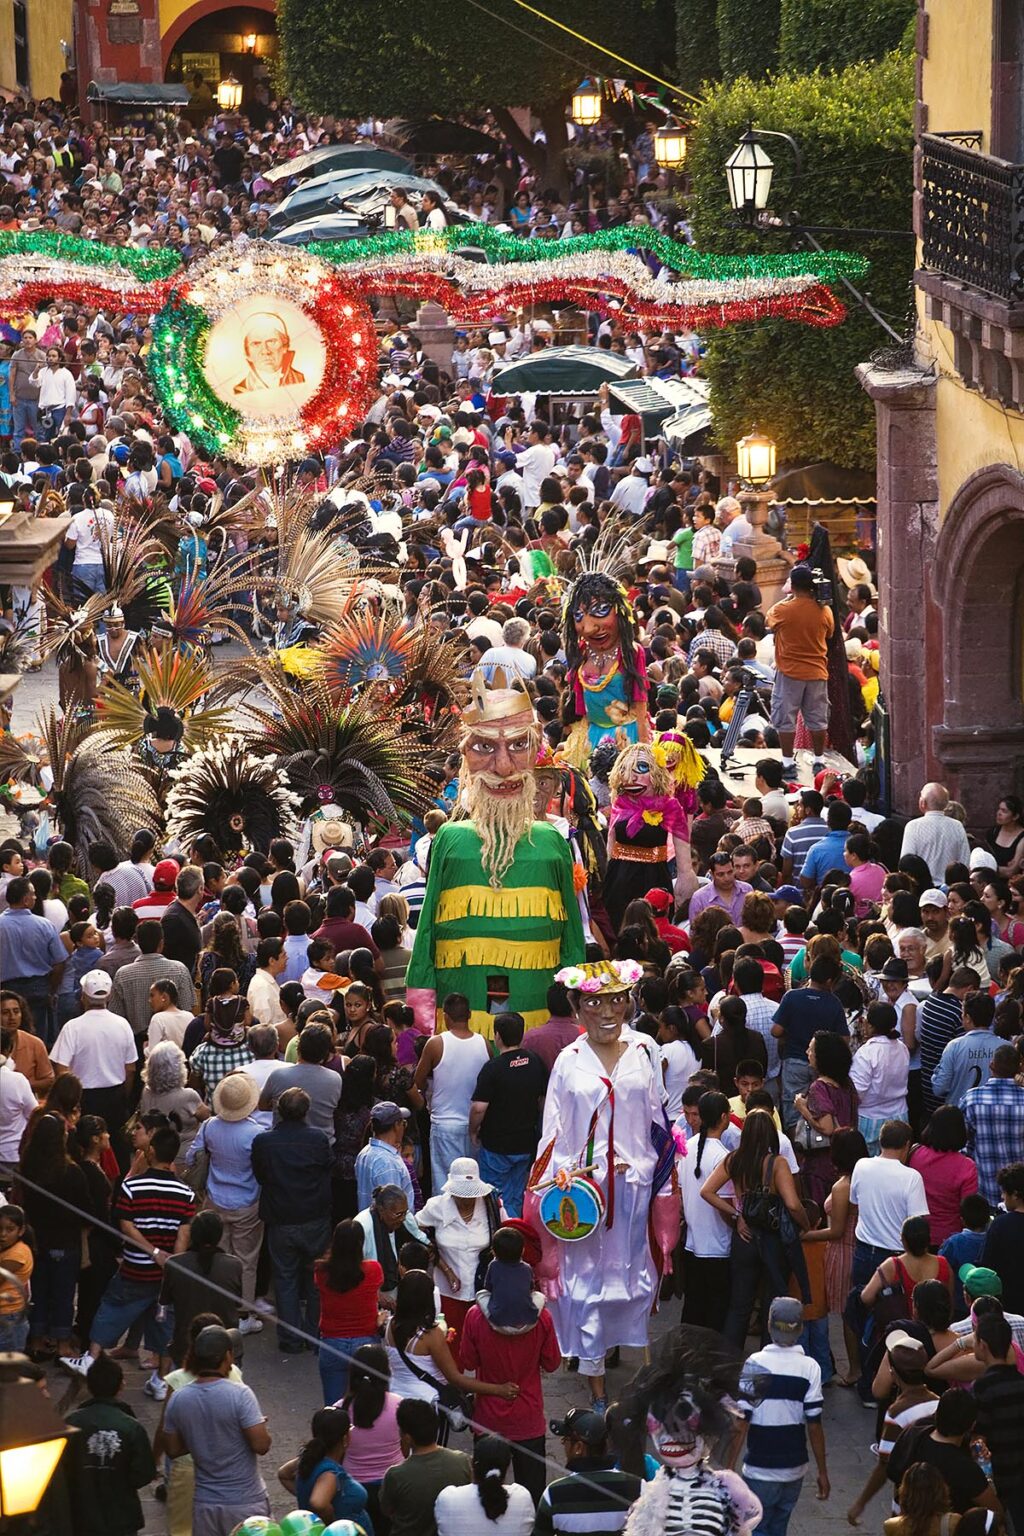 GIANT PAPER MACHE STILT WALKERS, DANCERS and the crowd at the annual INDEPENDENCE DAY PARADE in September - SAN MIGUEL DE ALLENDE, MEXICO